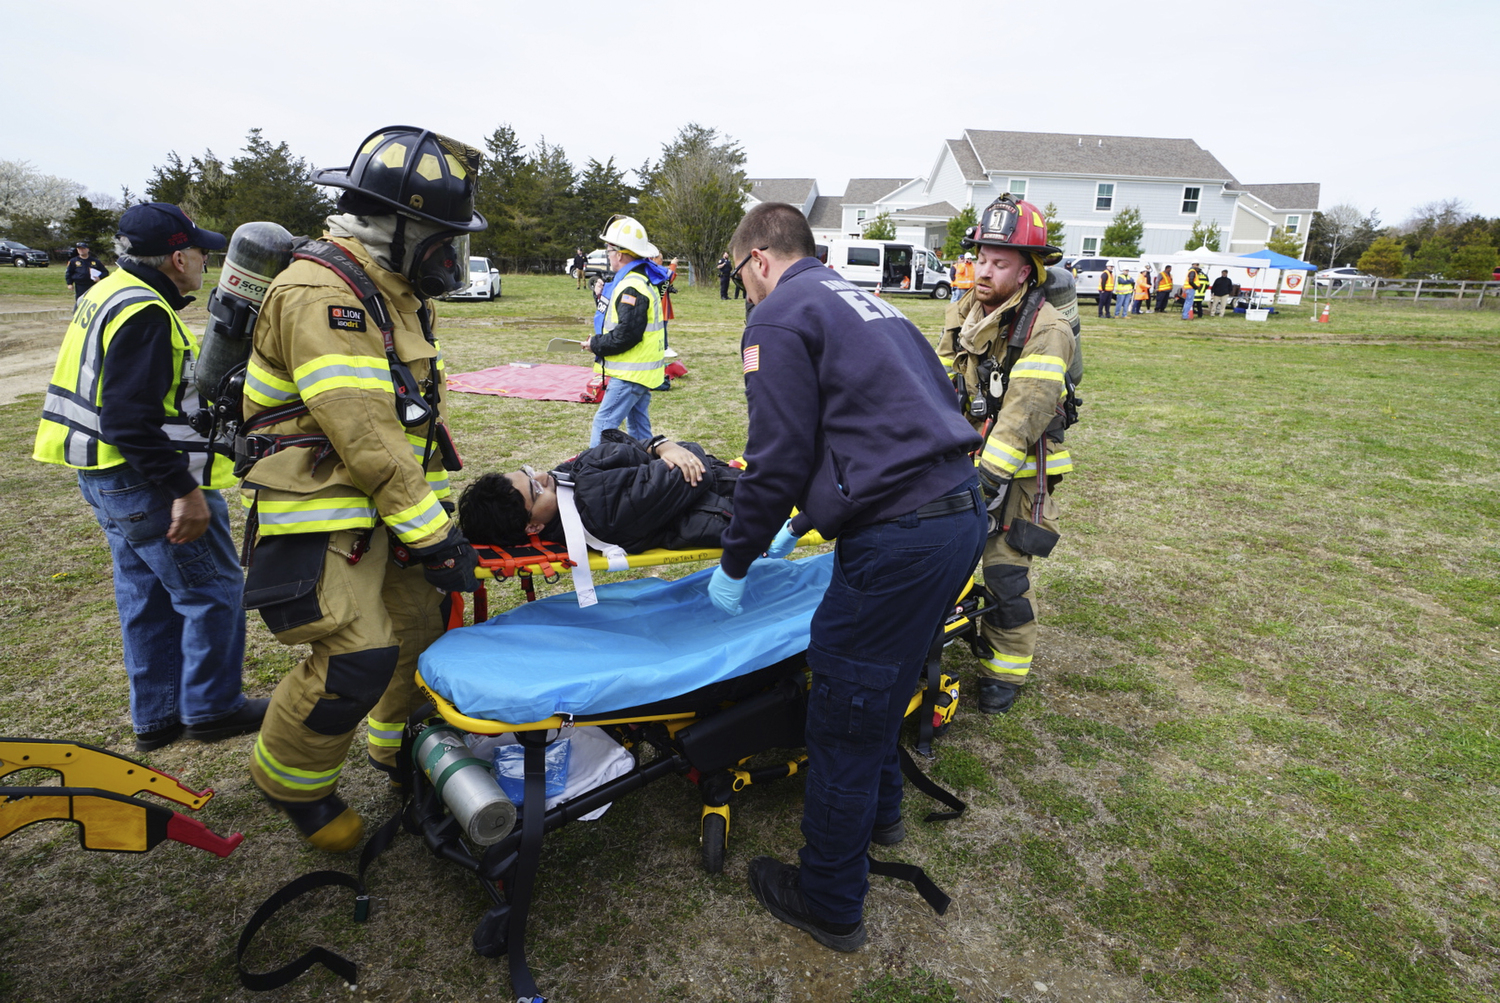 First responders go to work during the full-scale mass casualty drill involving a train accident on Sunday morning in Amagansett.  DOUG KUNTZ